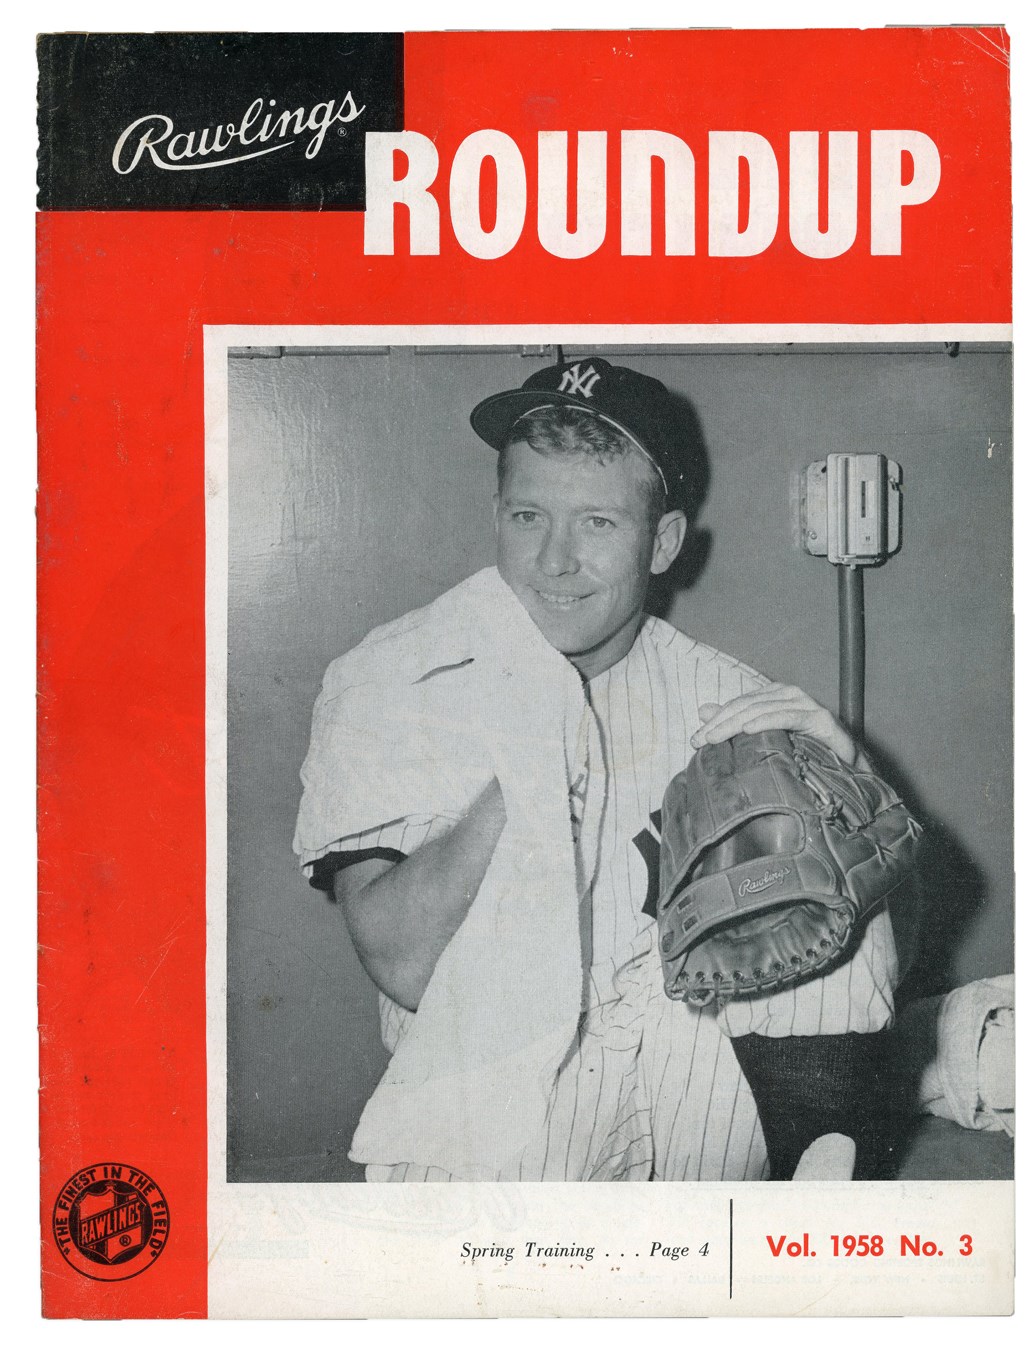 Mantle and Maris - 1958 Mickey Mantle "Rawlings Roundup" Magazine Trade Publication